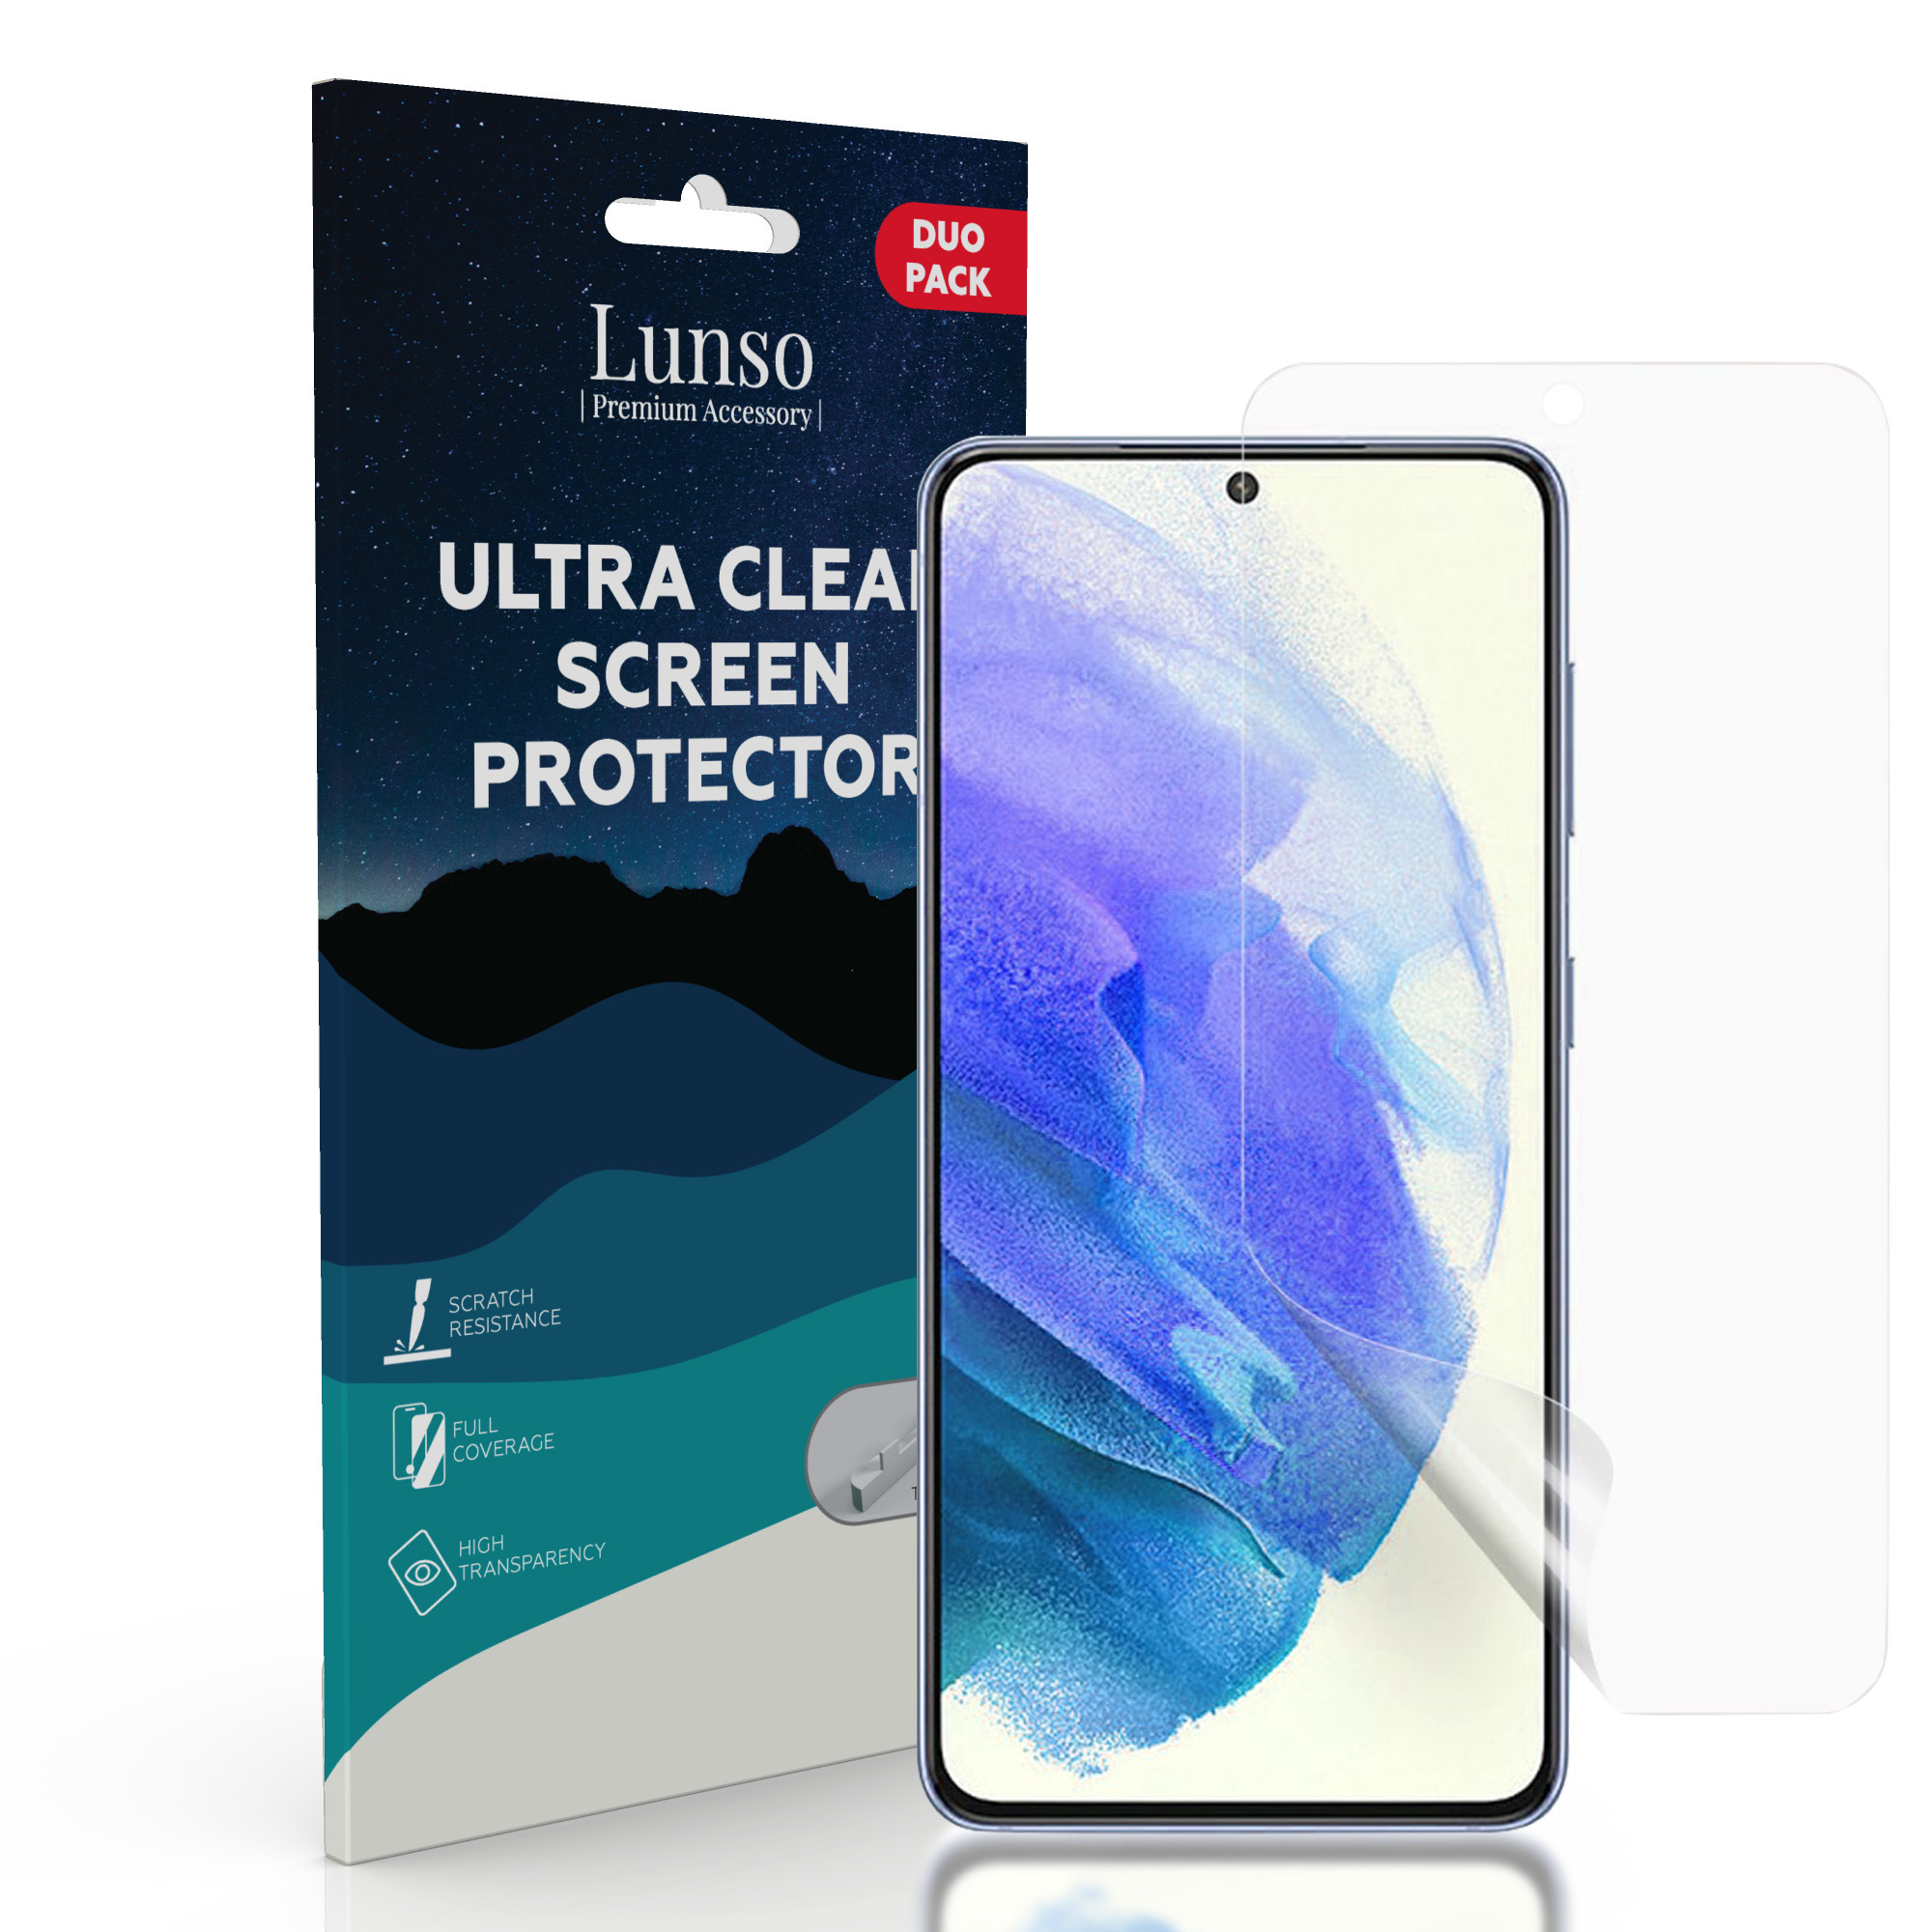 Lunso - Duo Pack (2 stuks) Beschermfolie - Full Cover Screen Protector - Samsung Galaxy S22